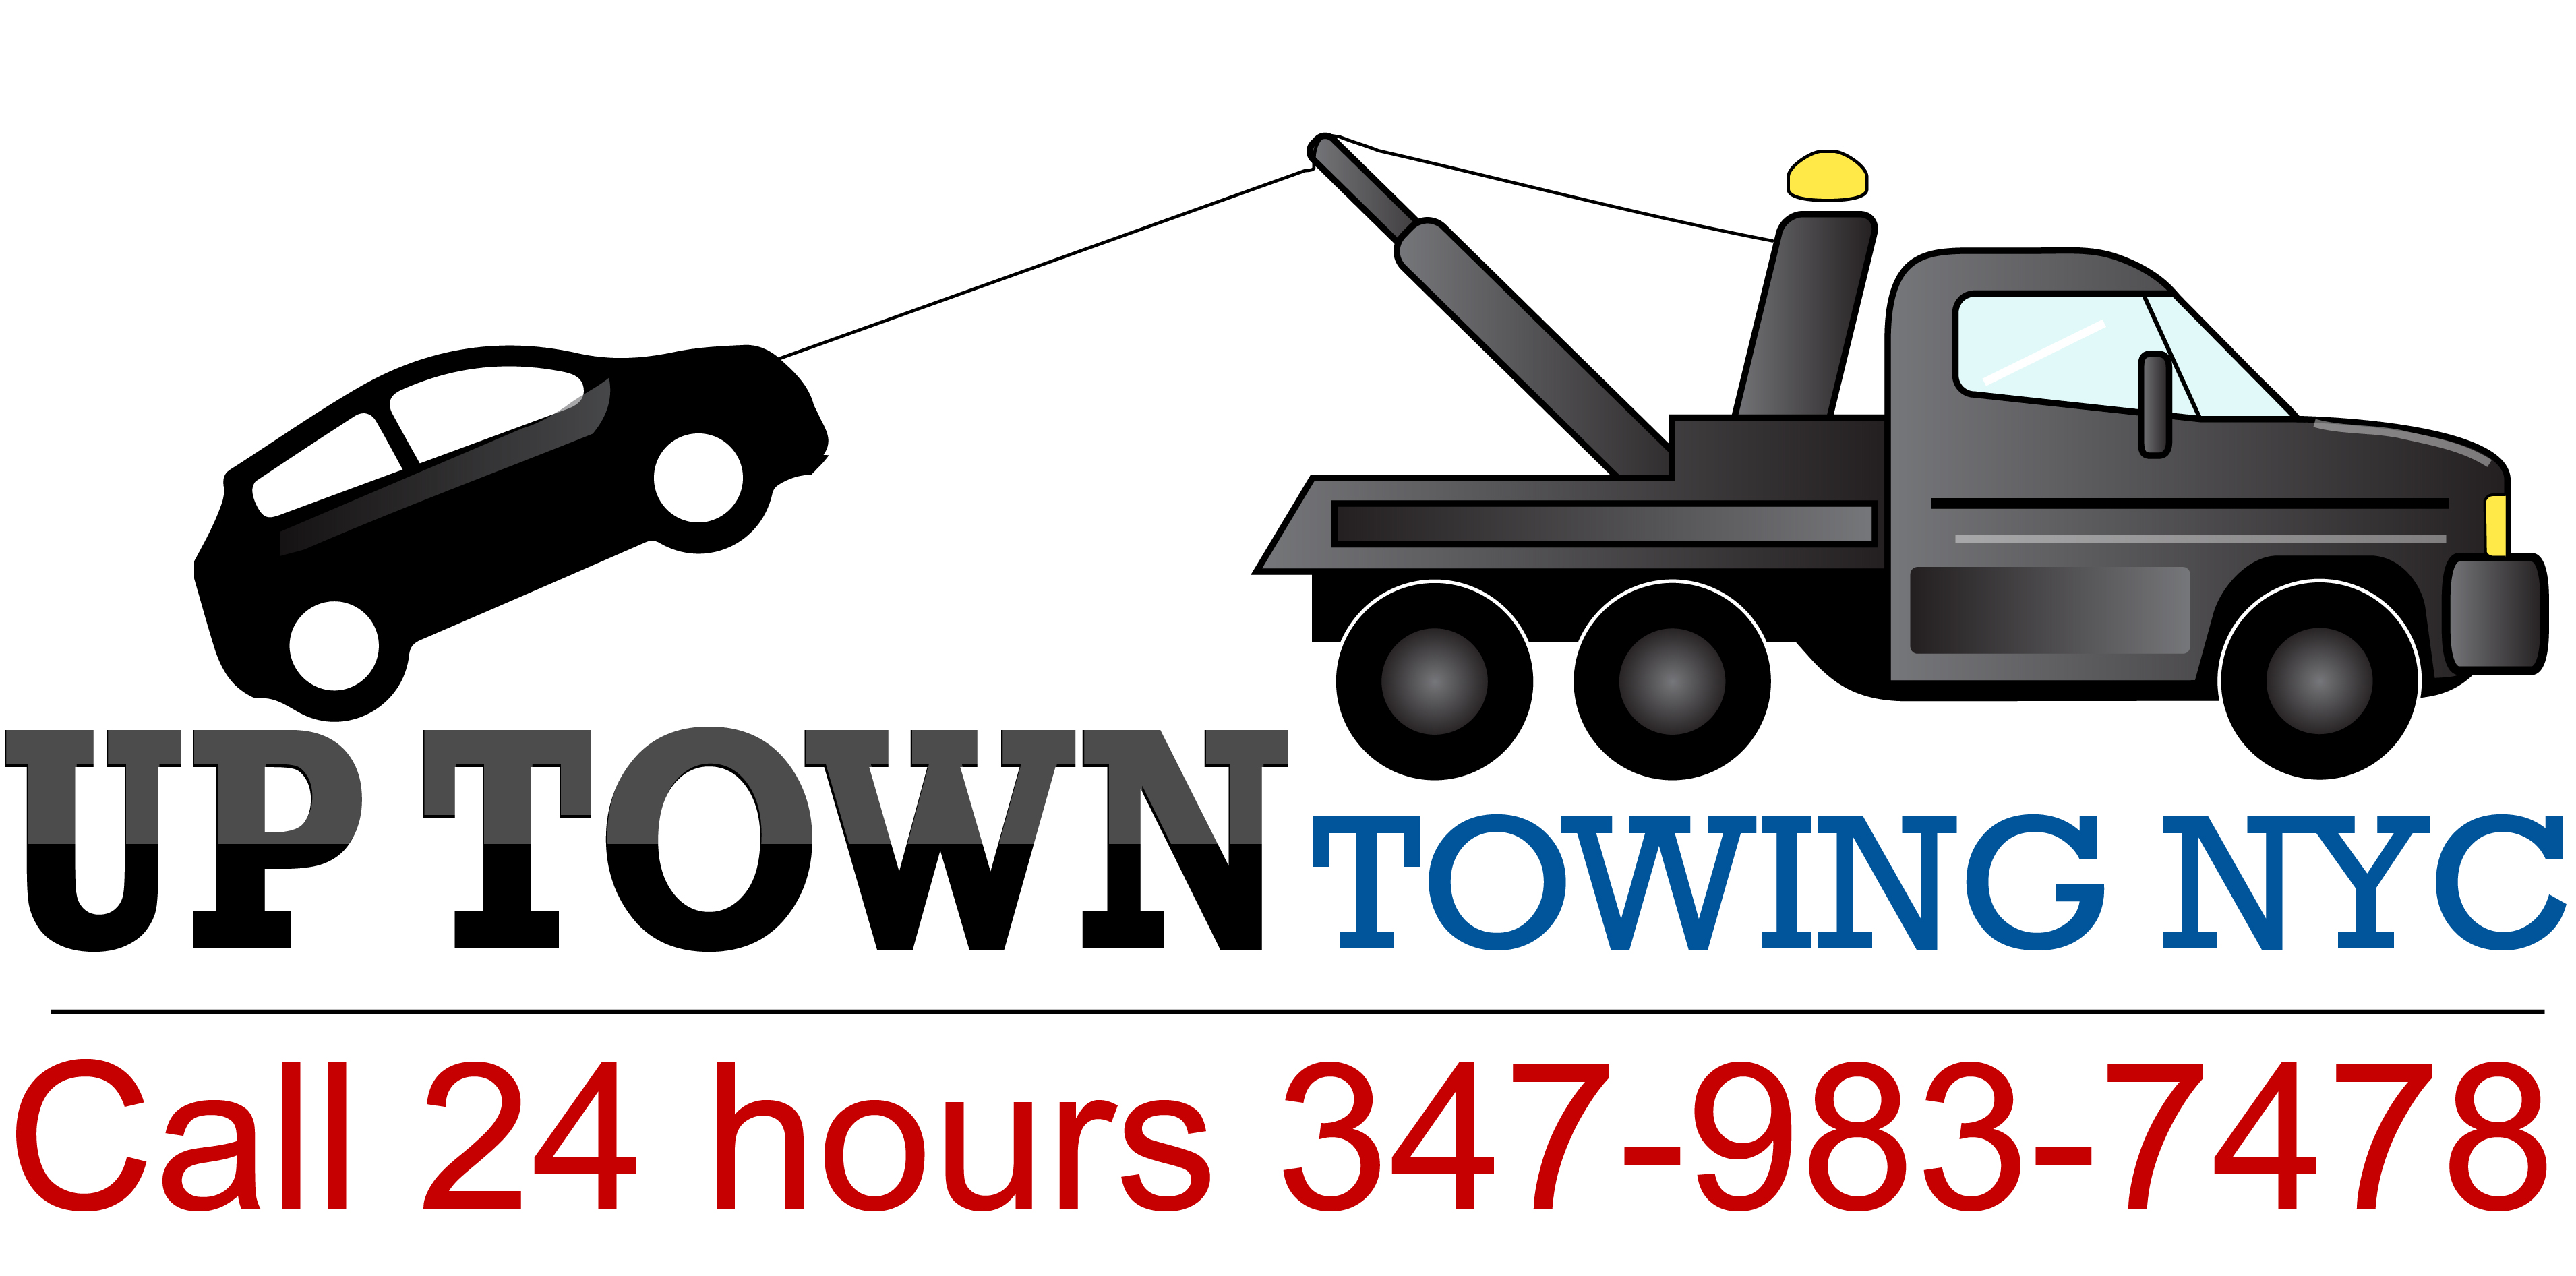 Uptown Towing NYC